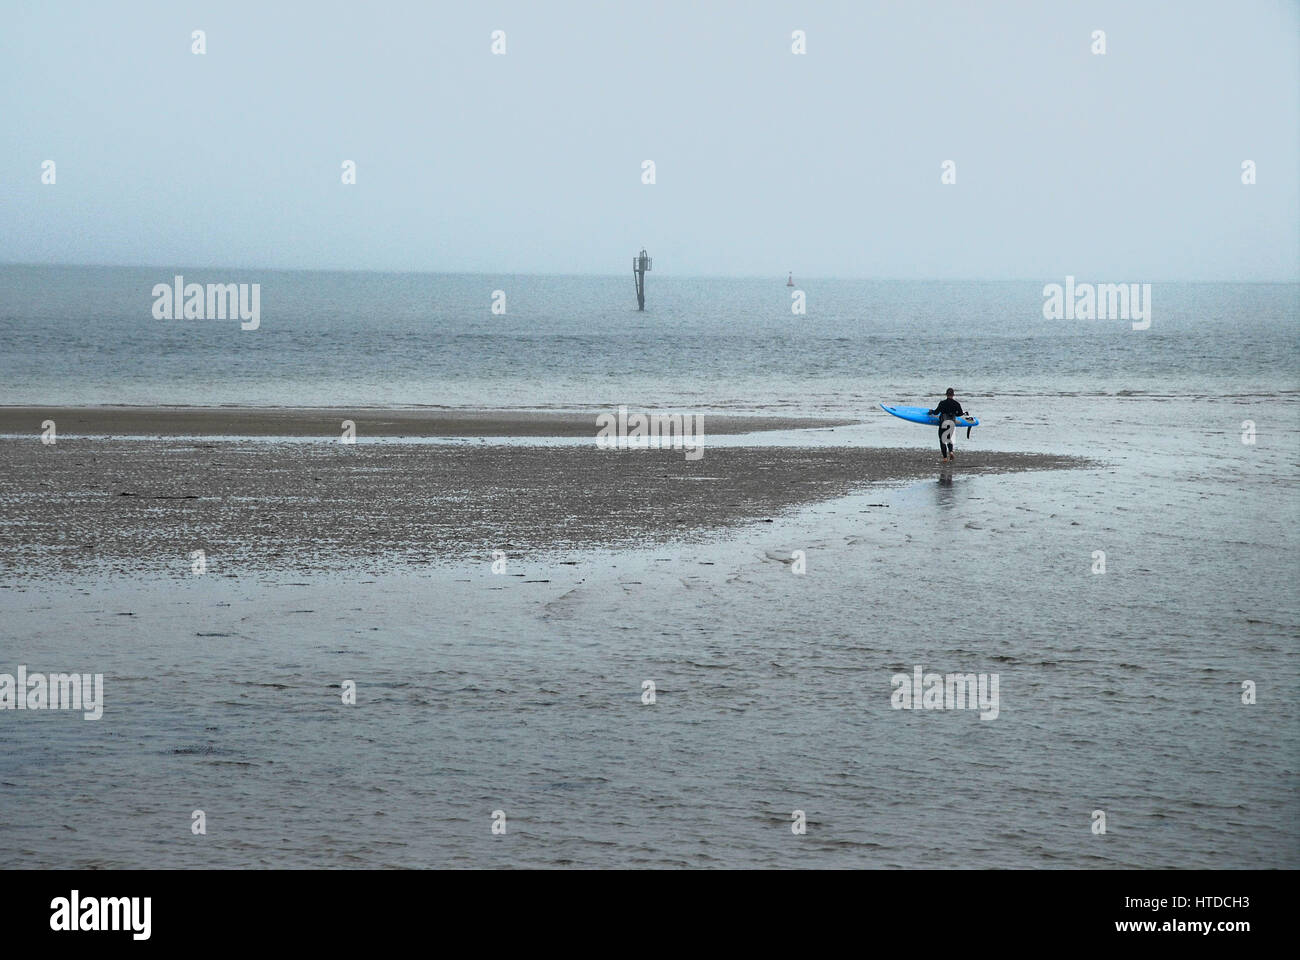 Weymouth & Portland, Dorset, 2017, Rising temperatures brings sea mist, as people enjoy the beach and the harbour on an overcast day Stock Photo